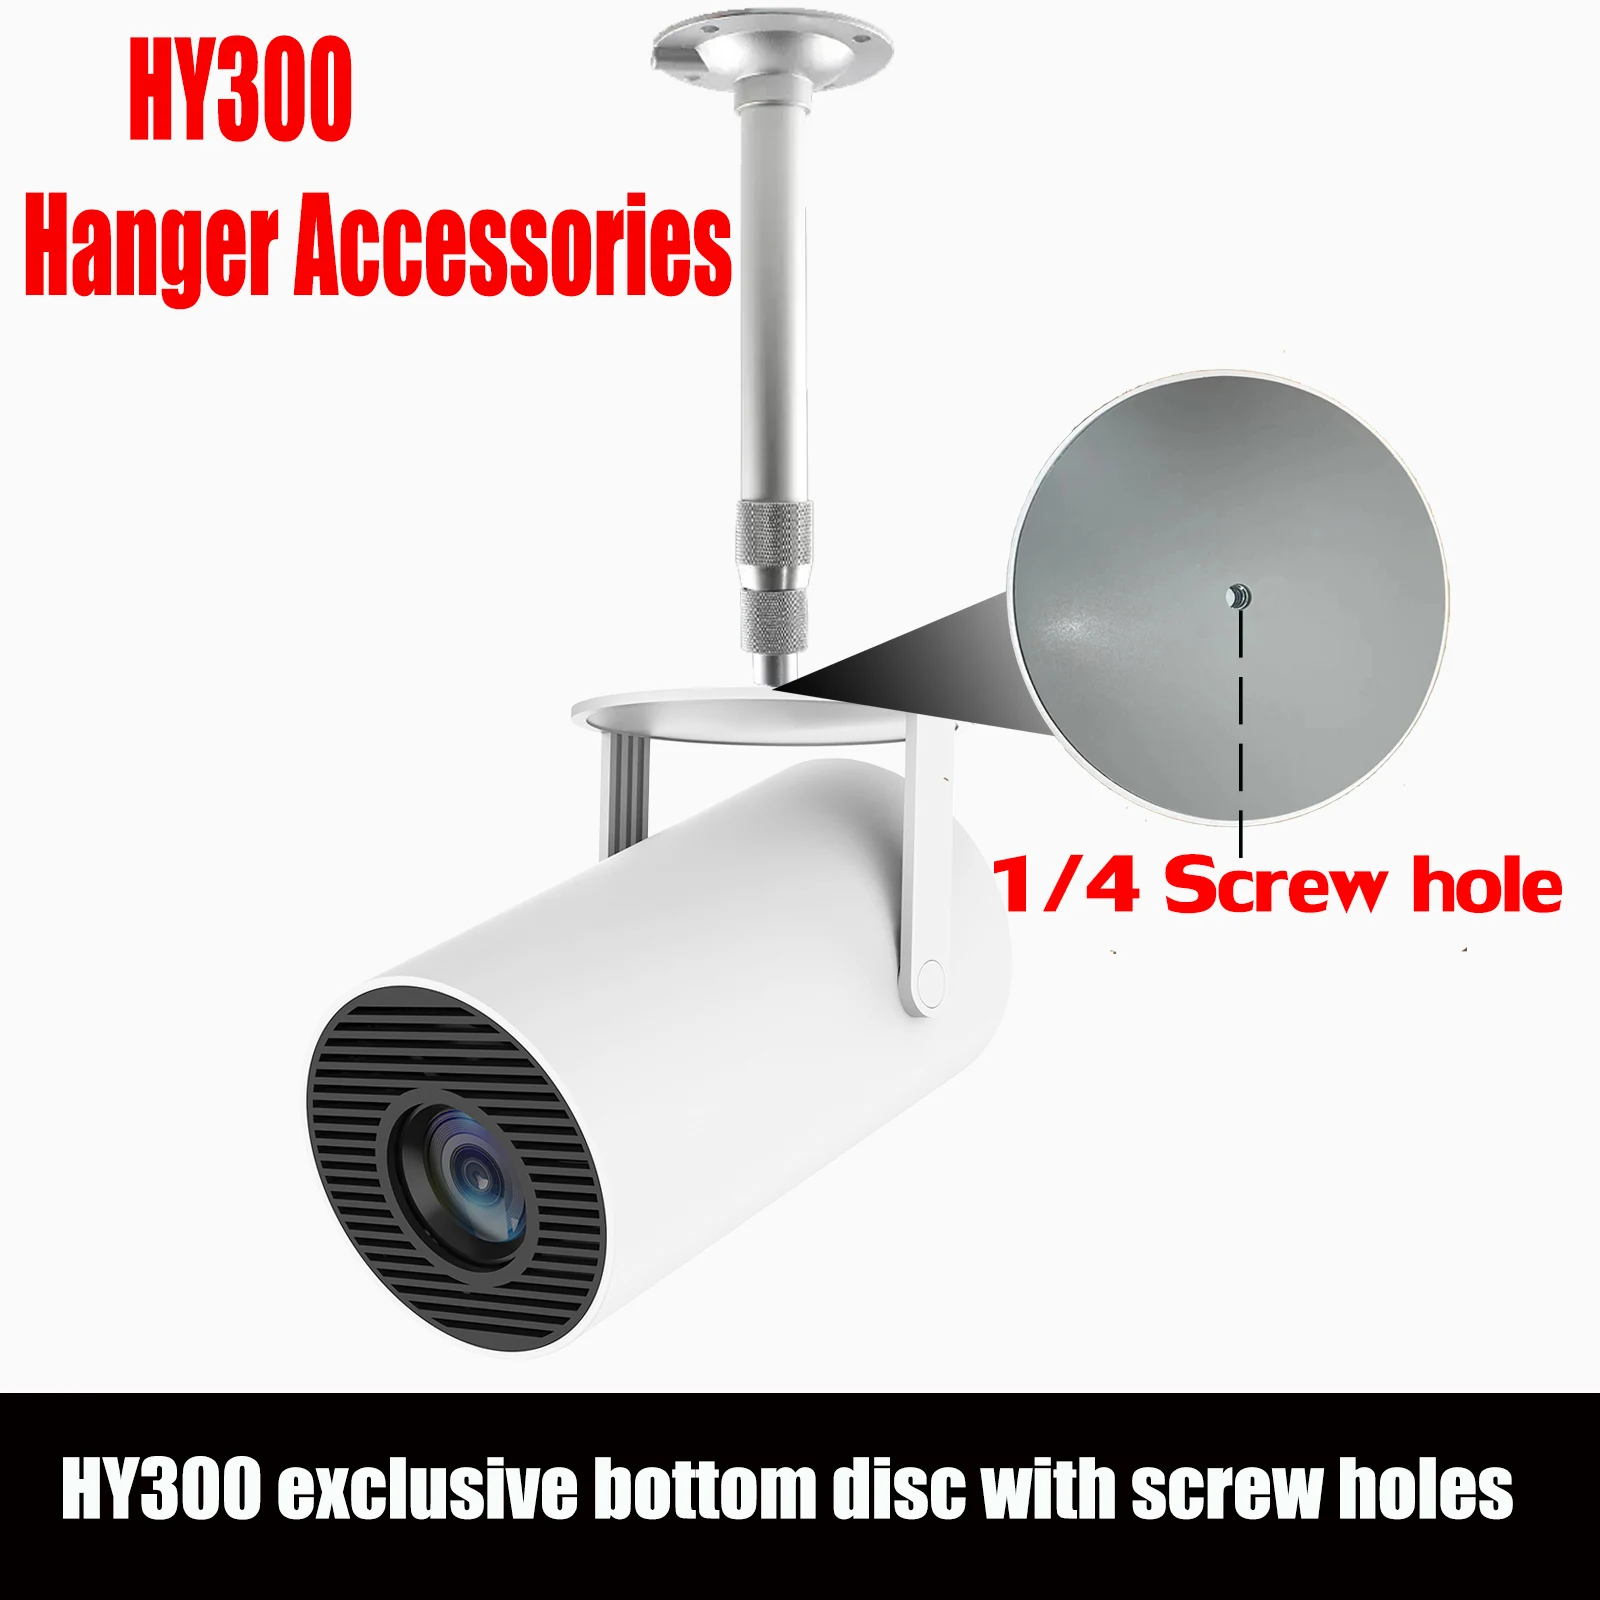 HY300 Projector accessories Ceiling and Wall Stand For Projector Backlight Compatible with bracket hanger 1/4 screw hole screw